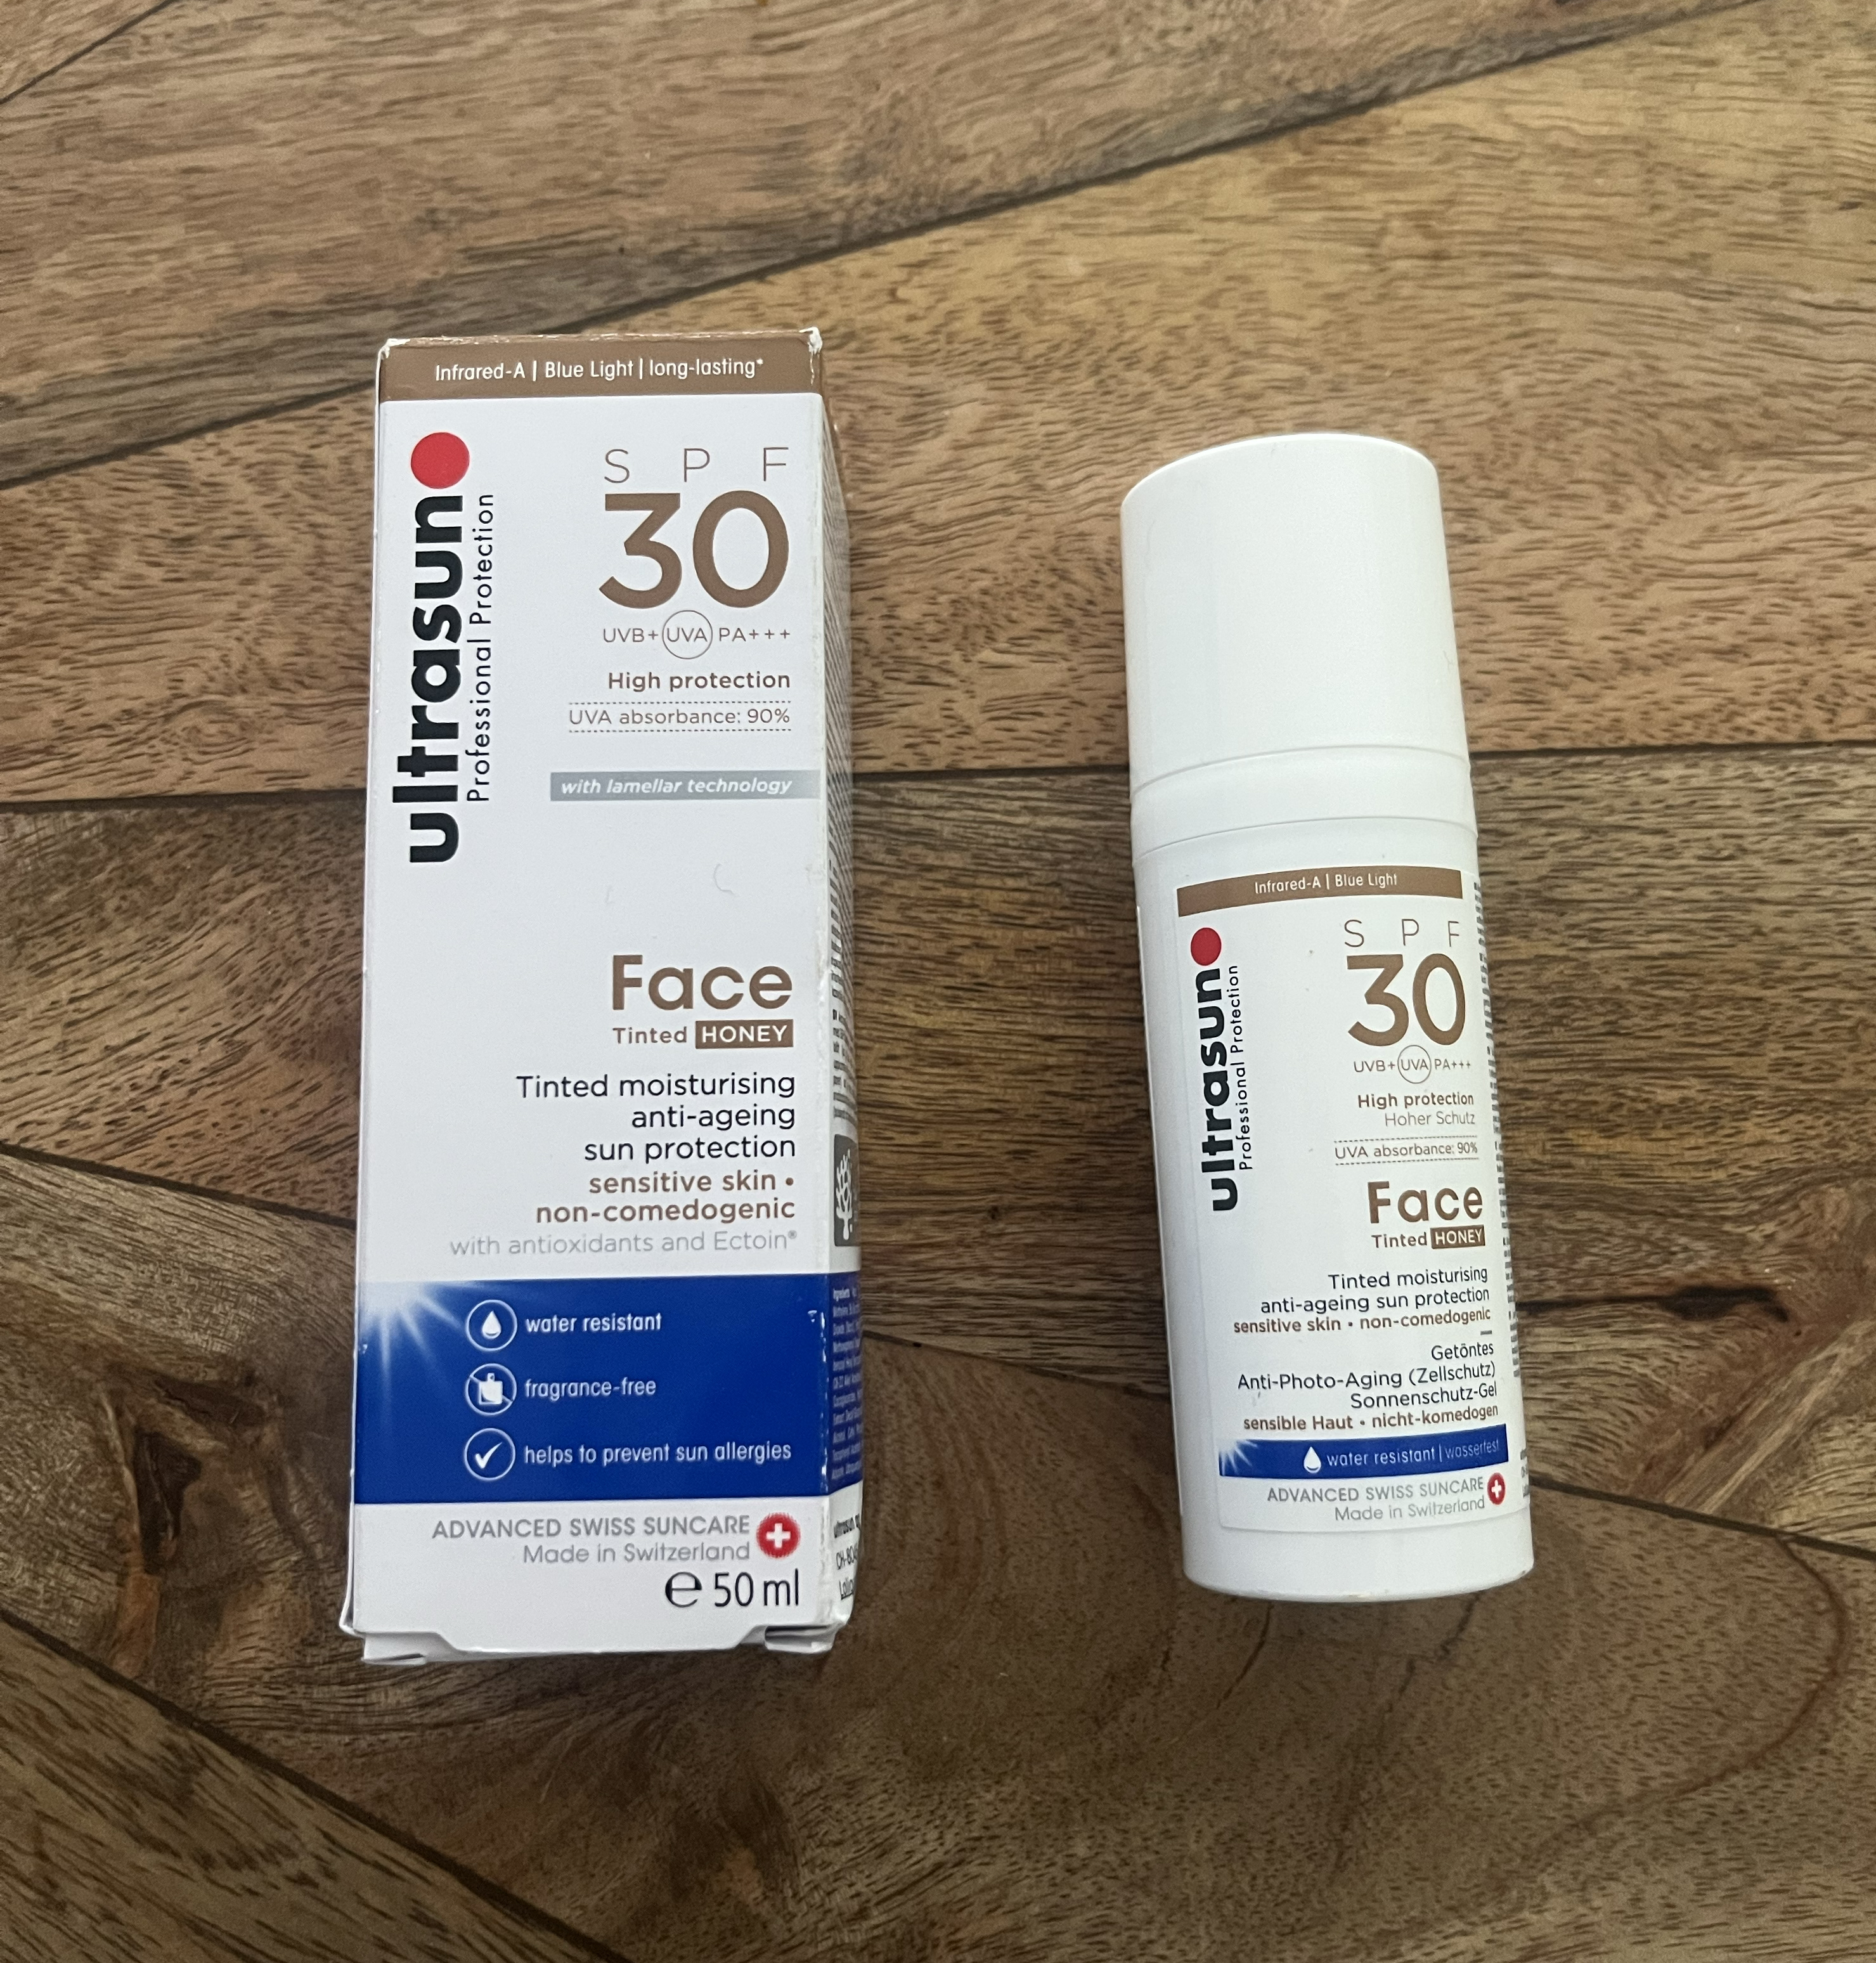 The Ultrasun SPF 50 cream provides coverage from the sun and covers blemishes.